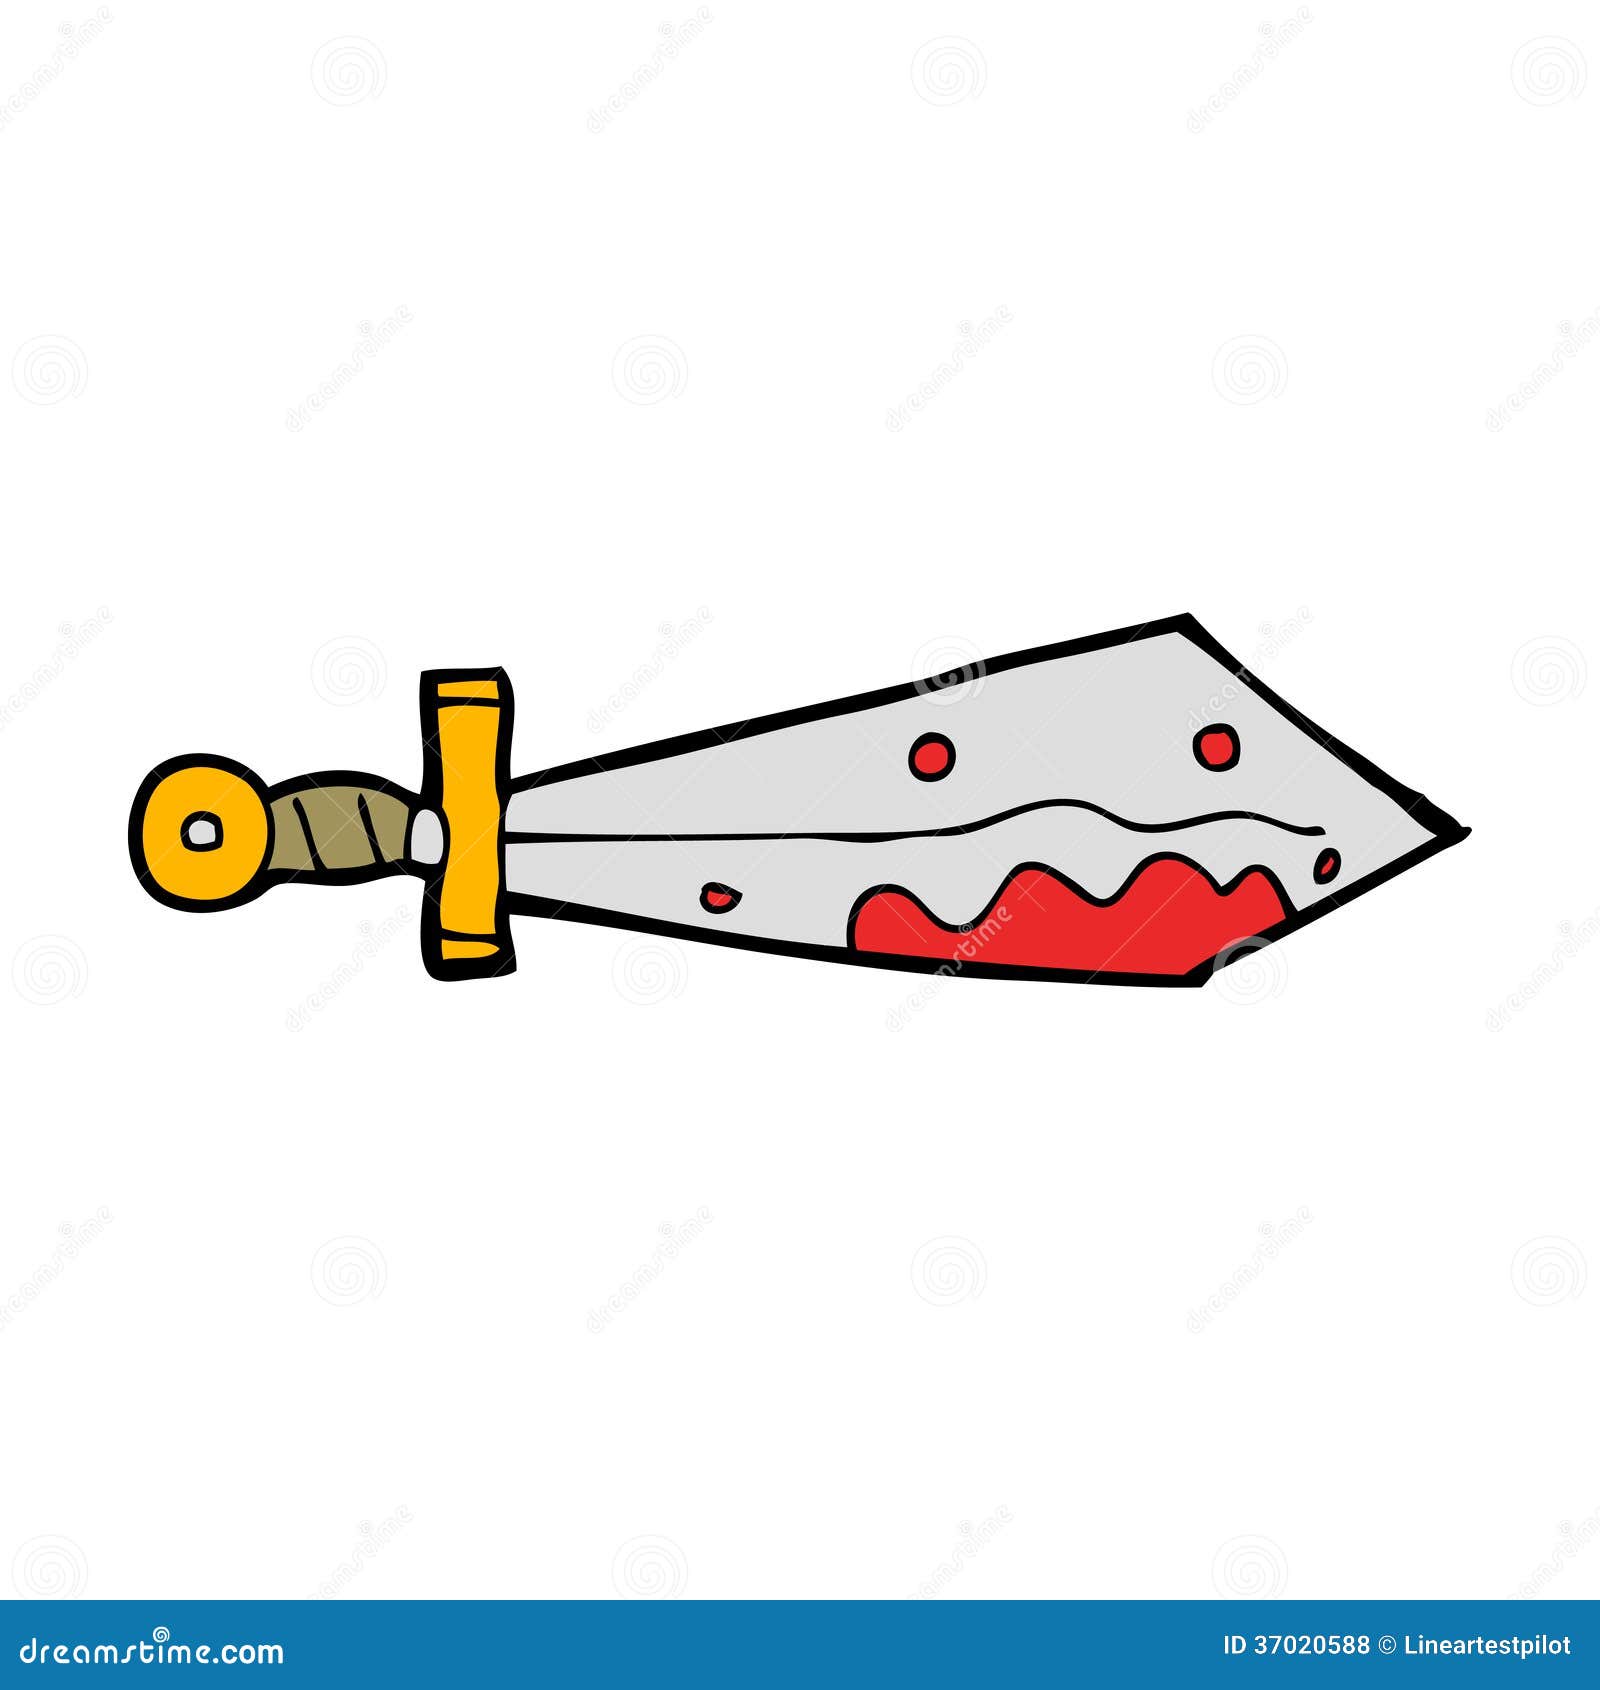 clipart blood draw - photo #29